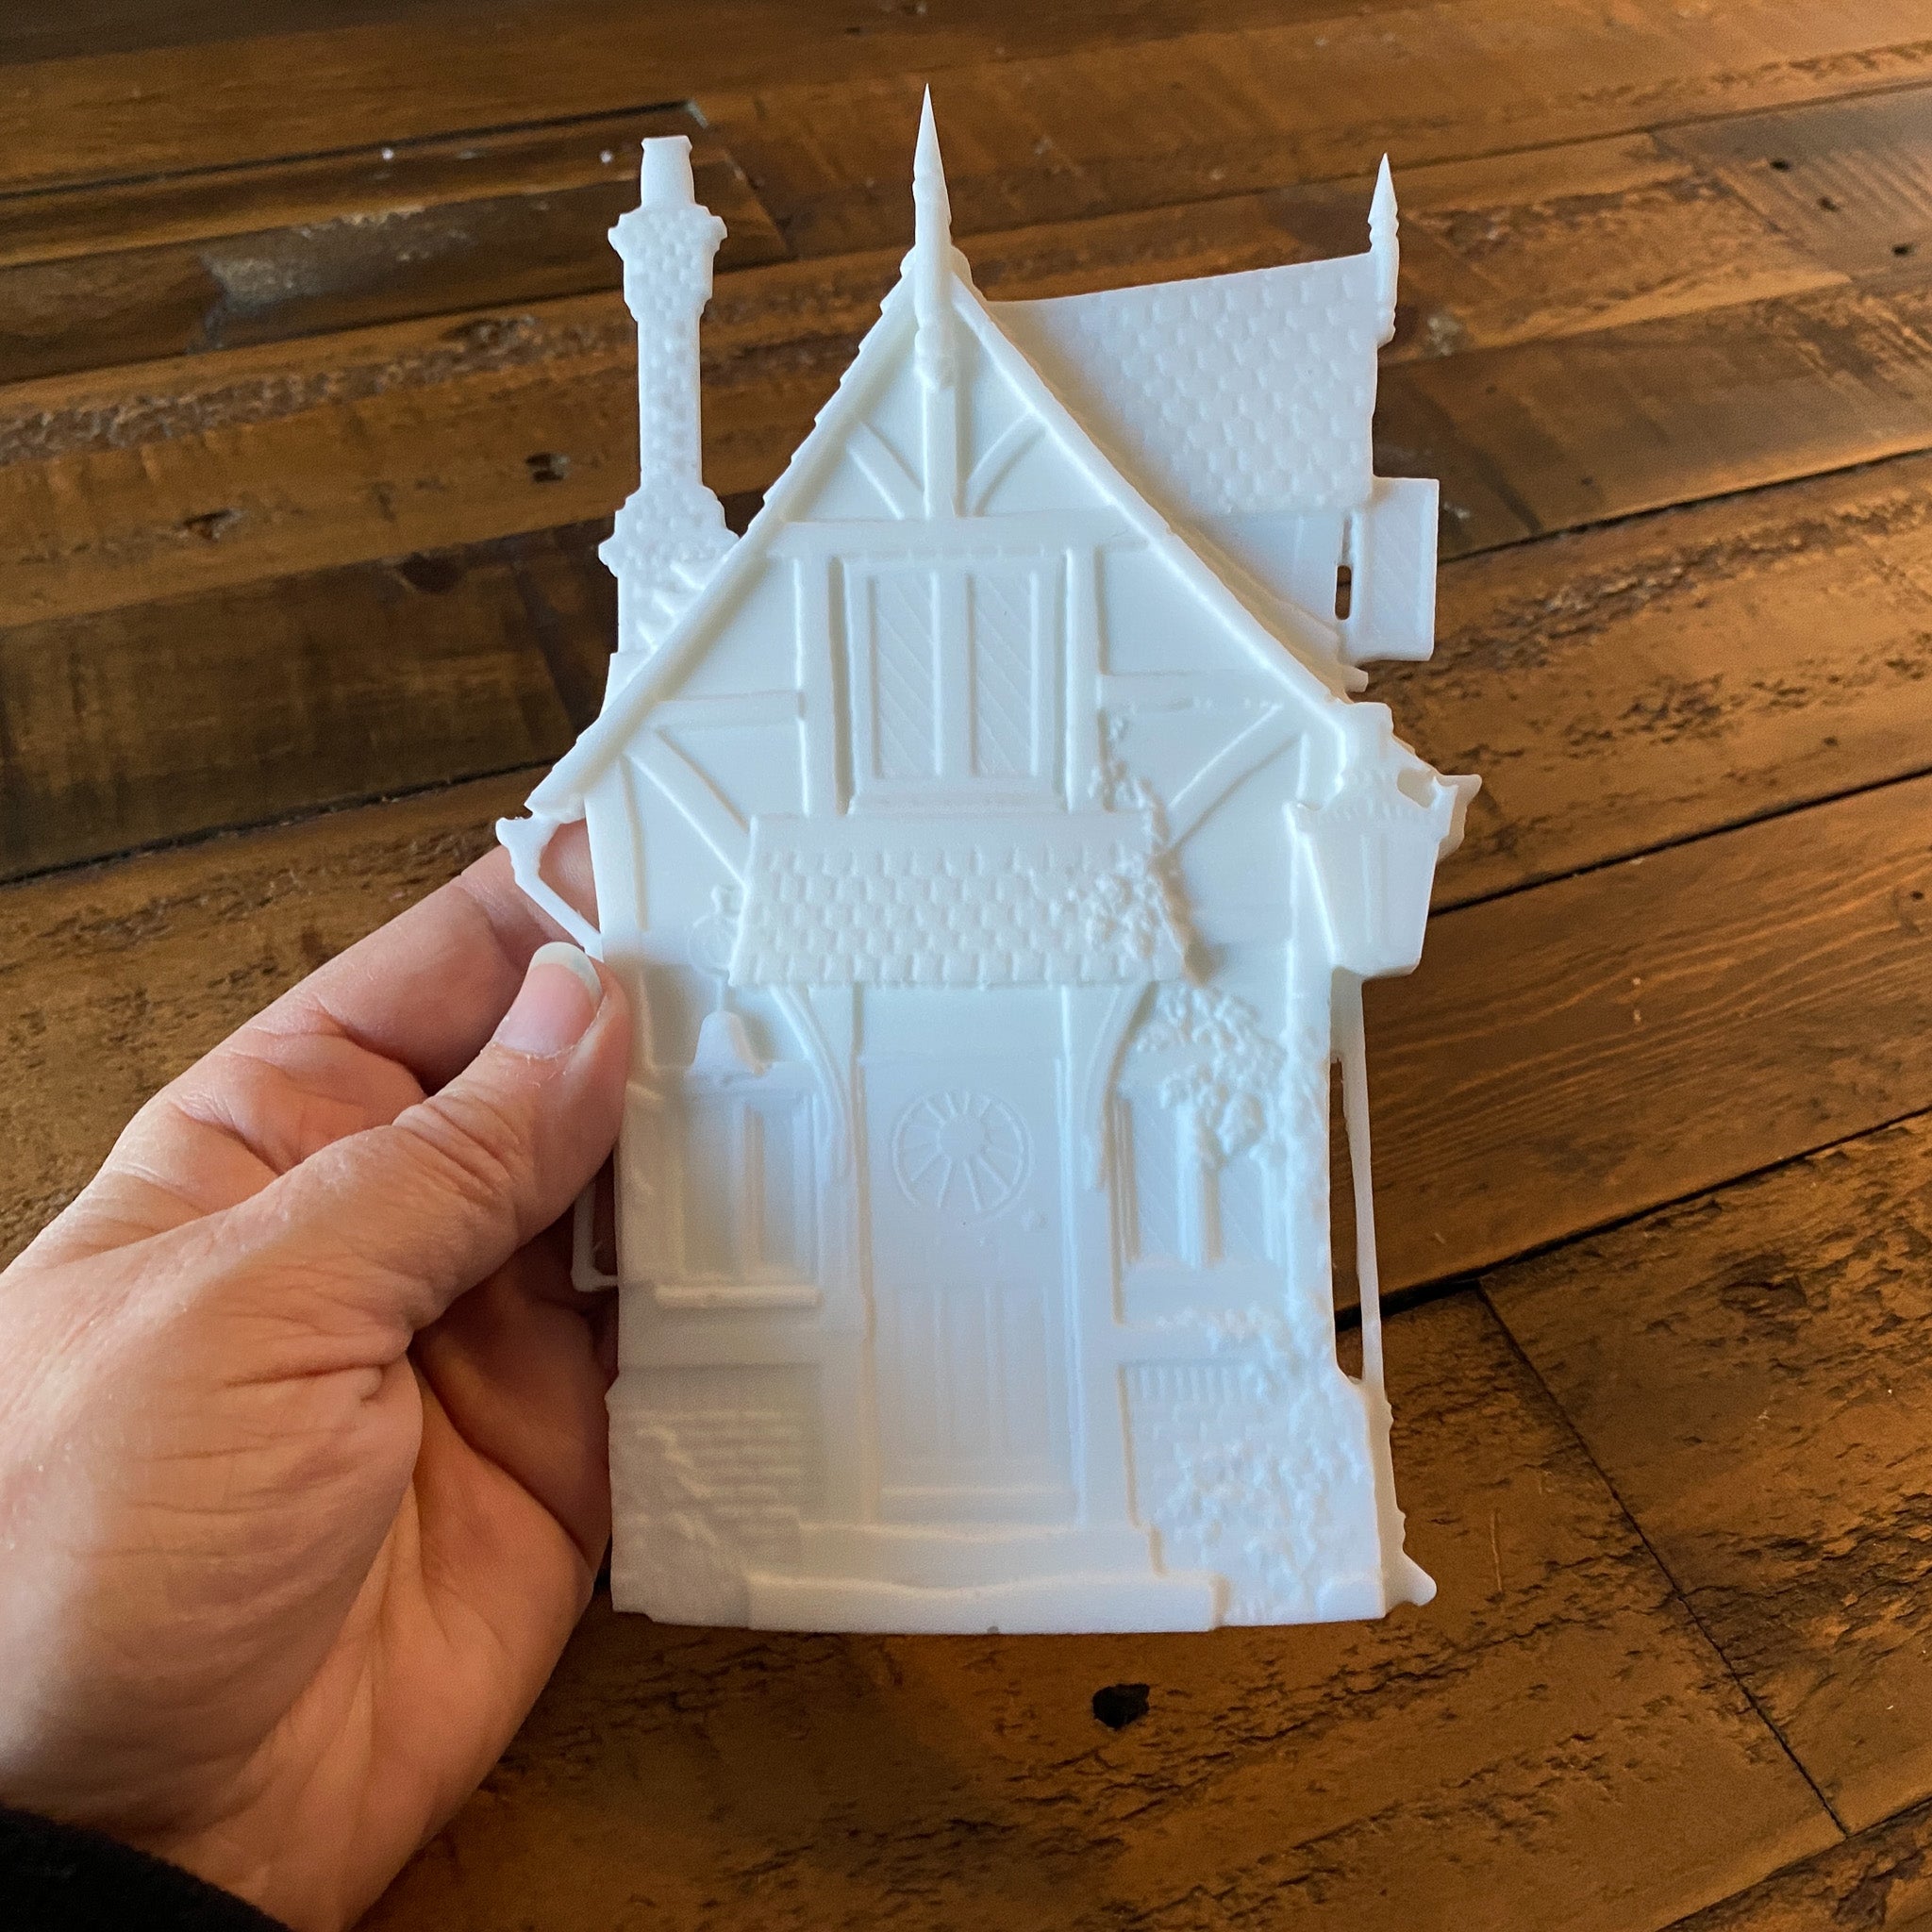 A hand holding a white resin silicone mold casting of a small Victorian style fairy house is against a wood background.